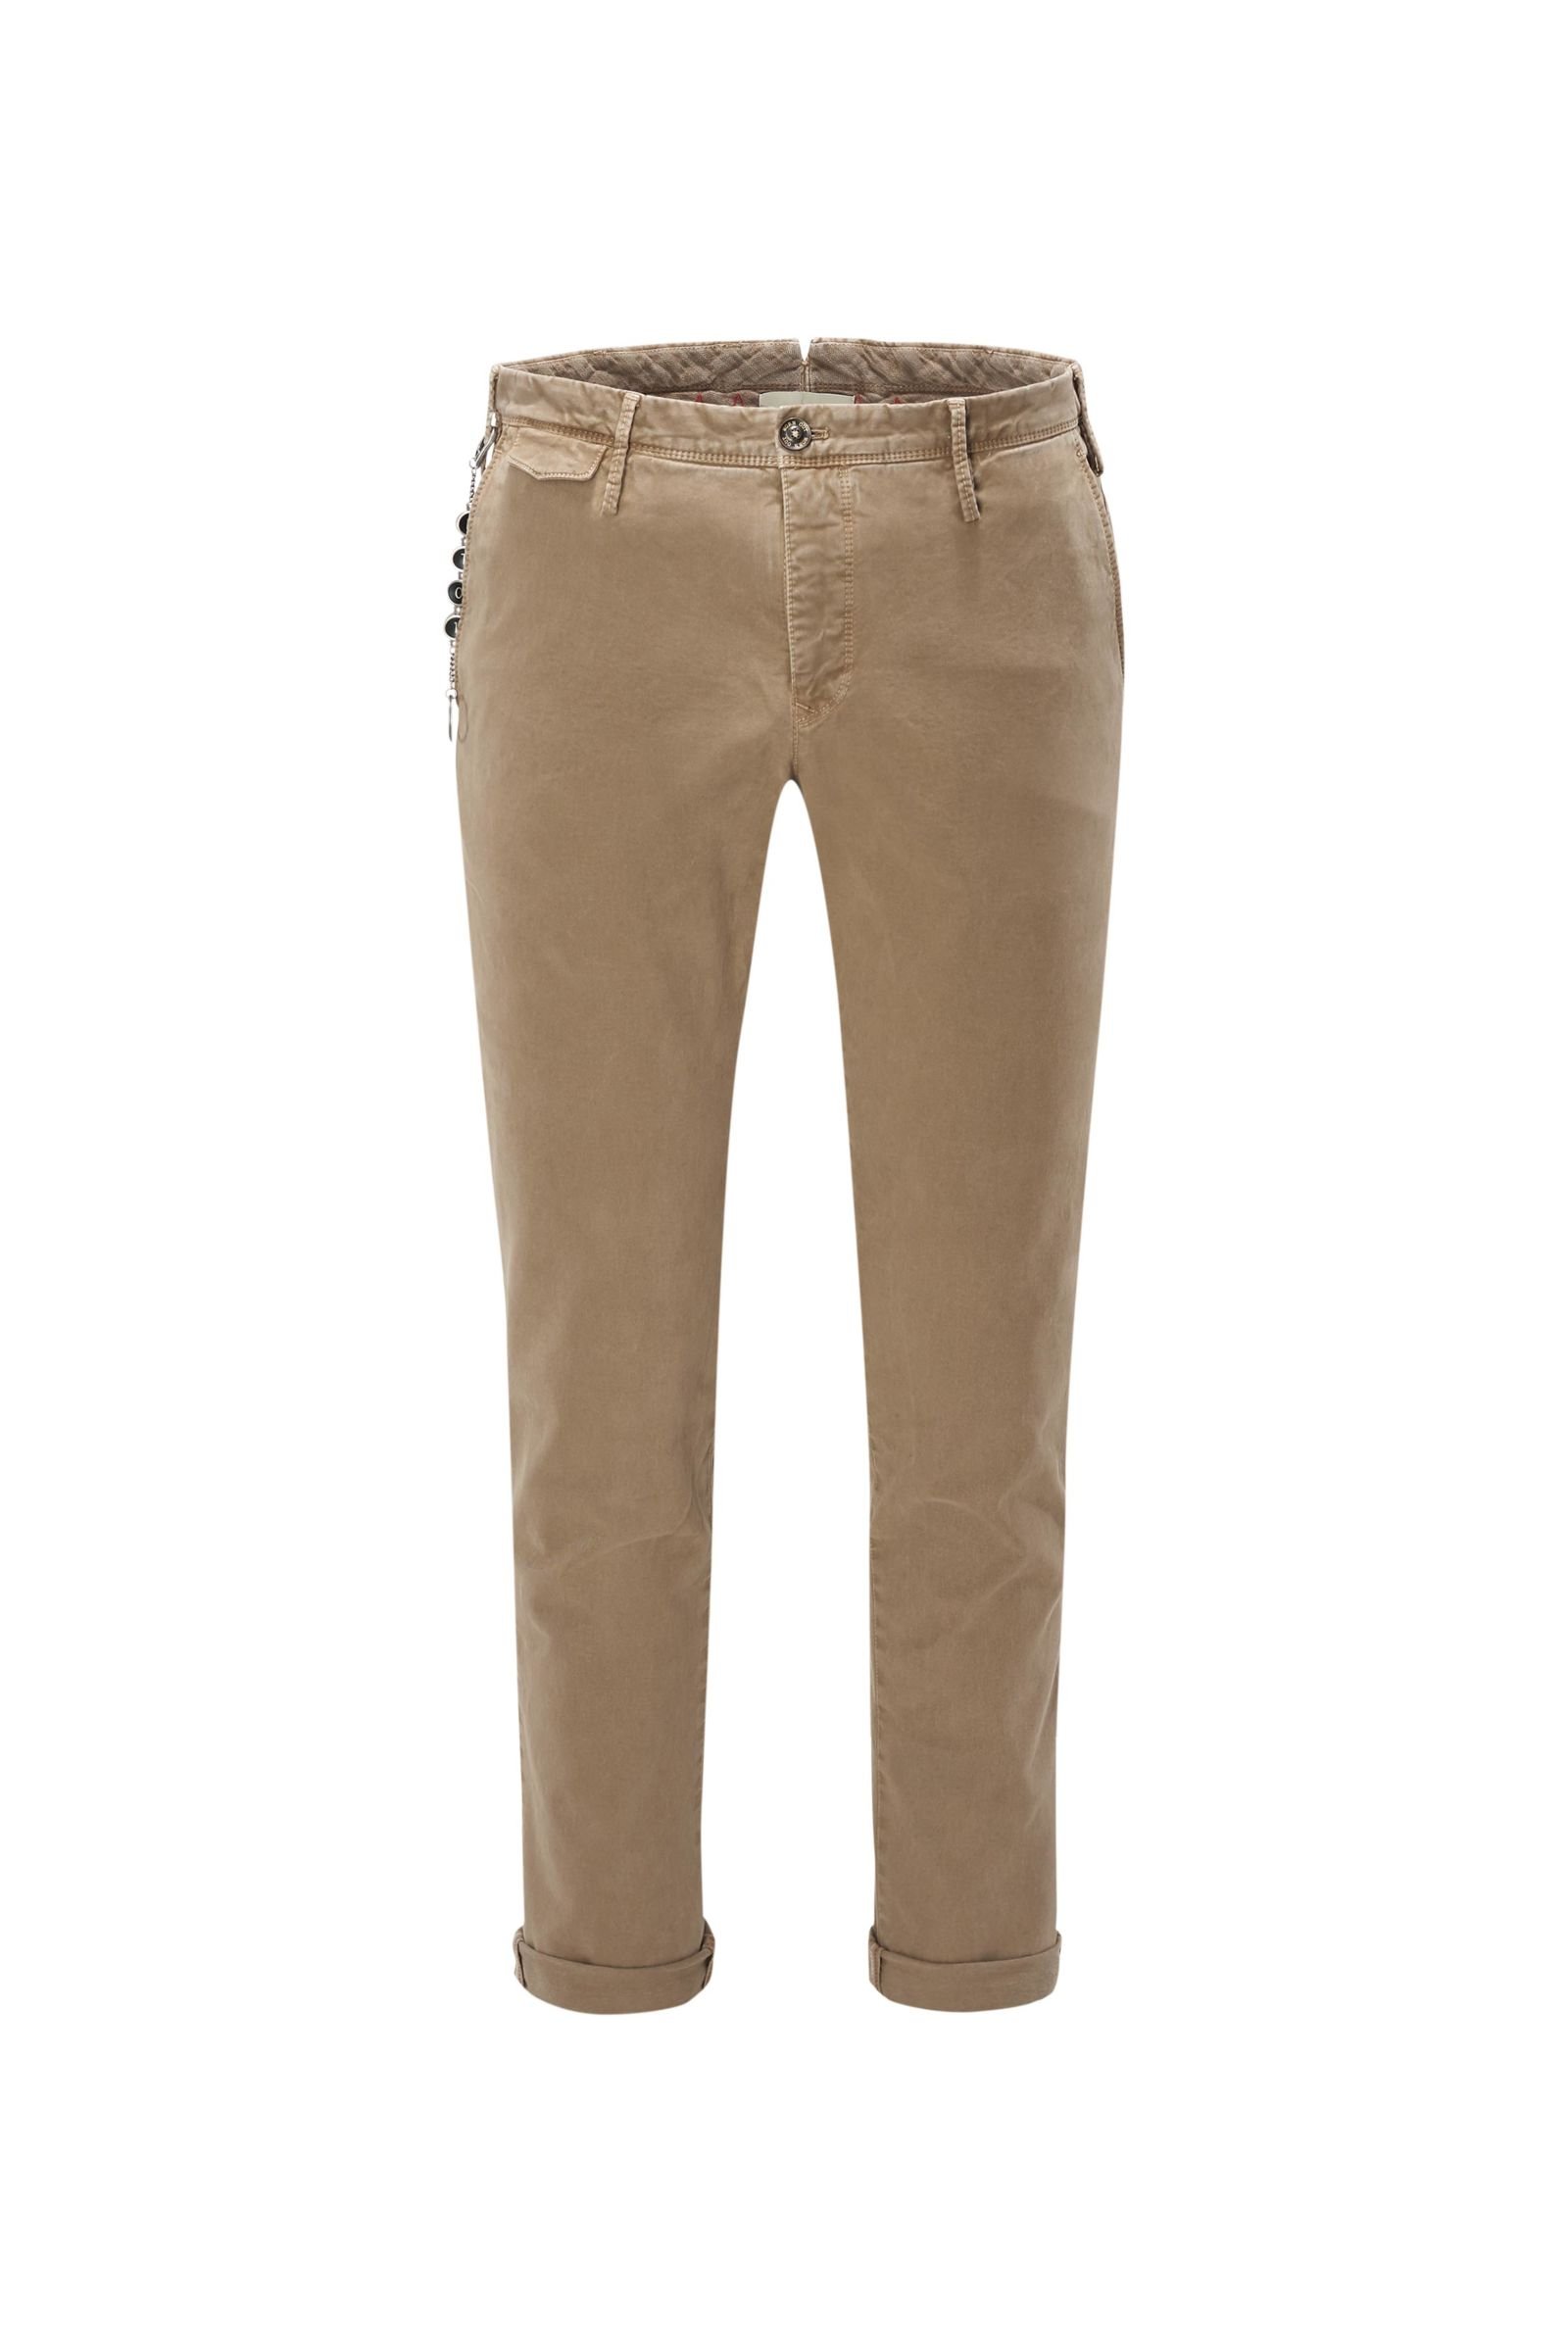 Cotton trousers 'Worn out Elegance' light brown